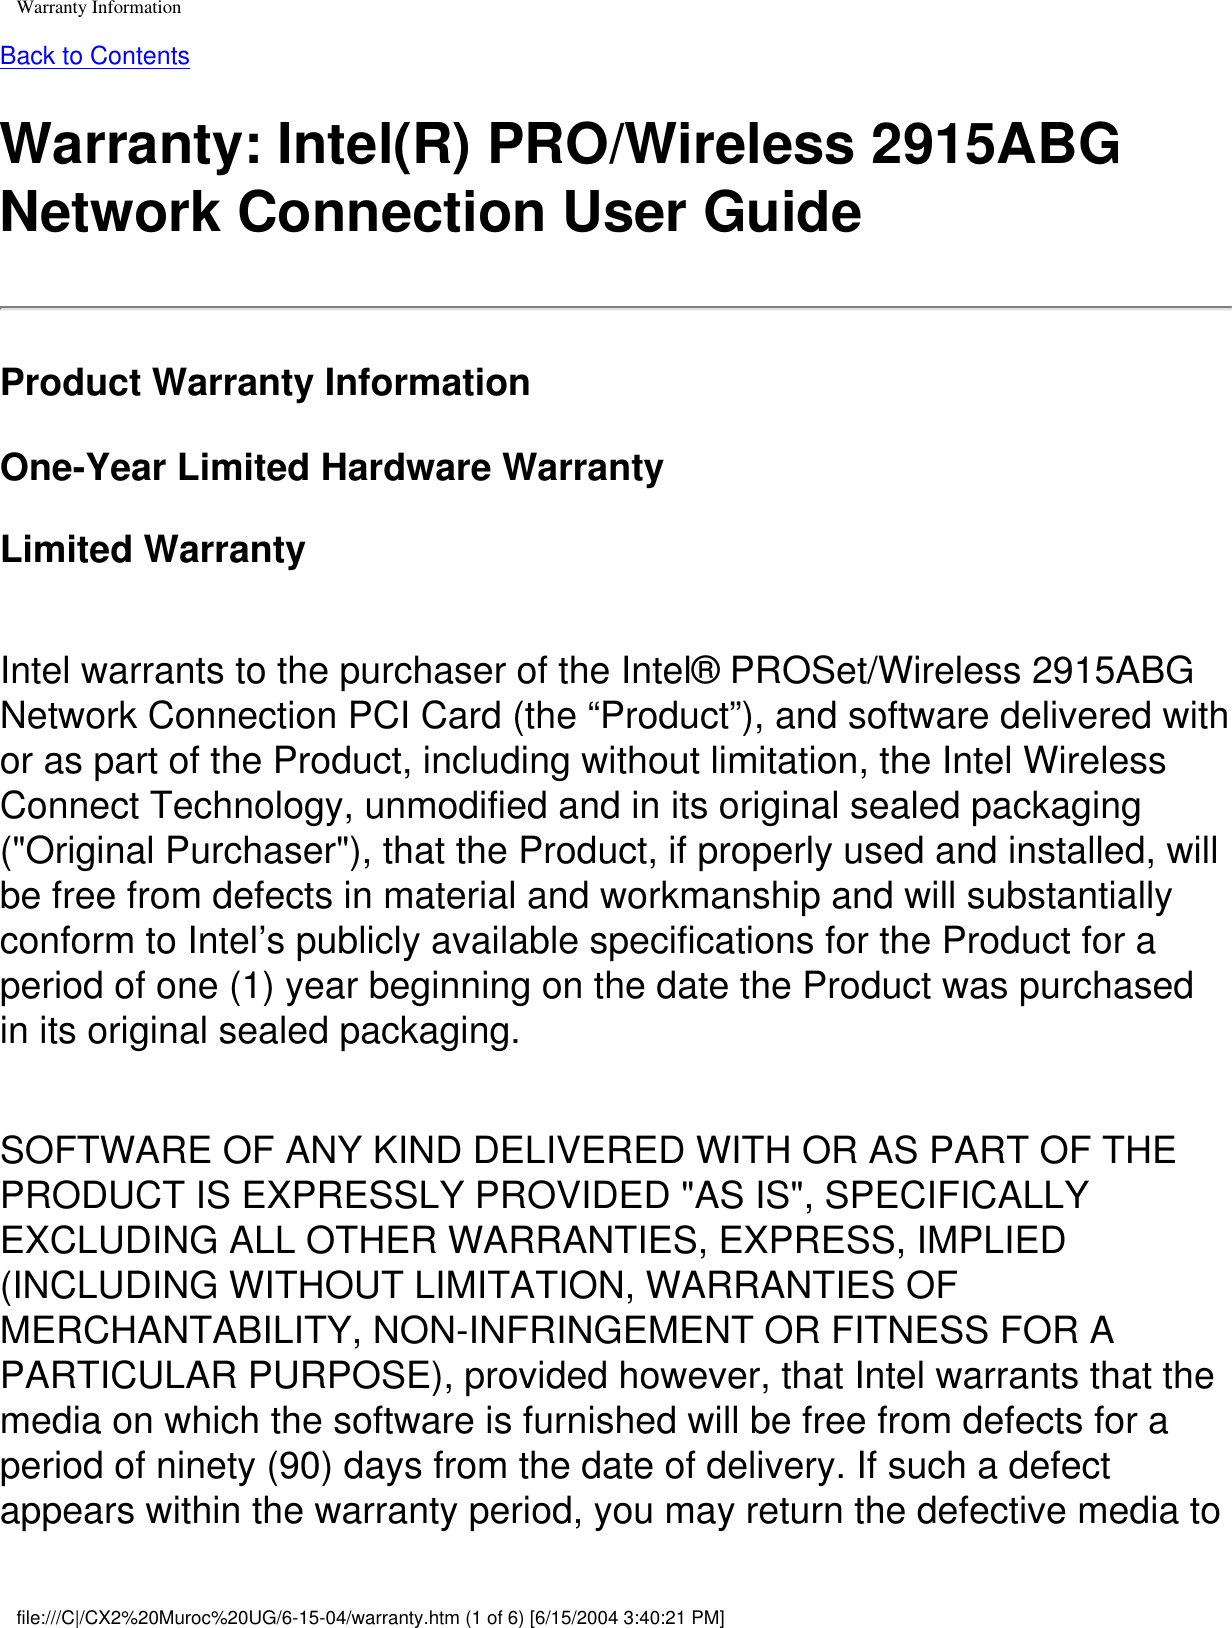 Warranty InformationBack to ContentsWarranty: Intel(R) PRO/Wireless 2915ABG Network Connection User GuideProduct Warranty InformationOne-Year Limited Hardware WarrantyLimited Warranty Intel warrants to the purchaser of the Intel® PROSet/Wireless 2915ABG Network Connection PCI Card (the “Product”), and software delivered with or as part of the Product, including without limitation, the Intel Wireless Connect Technology, unmodified and in its original sealed packaging (&quot;Original Purchaser&quot;), that the Product, if properly used and installed, will be free from defects in material and workmanship and will substantially conform to Intel’s publicly available specifications for the Product for a period of one (1) year beginning on the date the Product was purchased in its original sealed packaging.SOFTWARE OF ANY KIND DELIVERED WITH OR AS PART OF THE PRODUCT IS EXPRESSLY PROVIDED &quot;AS IS&quot;, SPECIFICALLY EXCLUDING ALL OTHER WARRANTIES, EXPRESS, IMPLIED (INCLUDING WITHOUT LIMITATION, WARRANTIES OF MERCHANTABILITY, NON-INFRINGEMENT OR FITNESS FOR A PARTICULAR PURPOSE), provided however, that Intel warrants that the media on which the software is furnished will be free from defects for a period of ninety (90) days from the date of delivery. If such a defect appears within the warranty period, you may return the defective media to file:///C|/CX2%20Muroc%20UG/6-15-04/warranty.htm (1 of 6) [6/15/2004 3:40:21 PM]